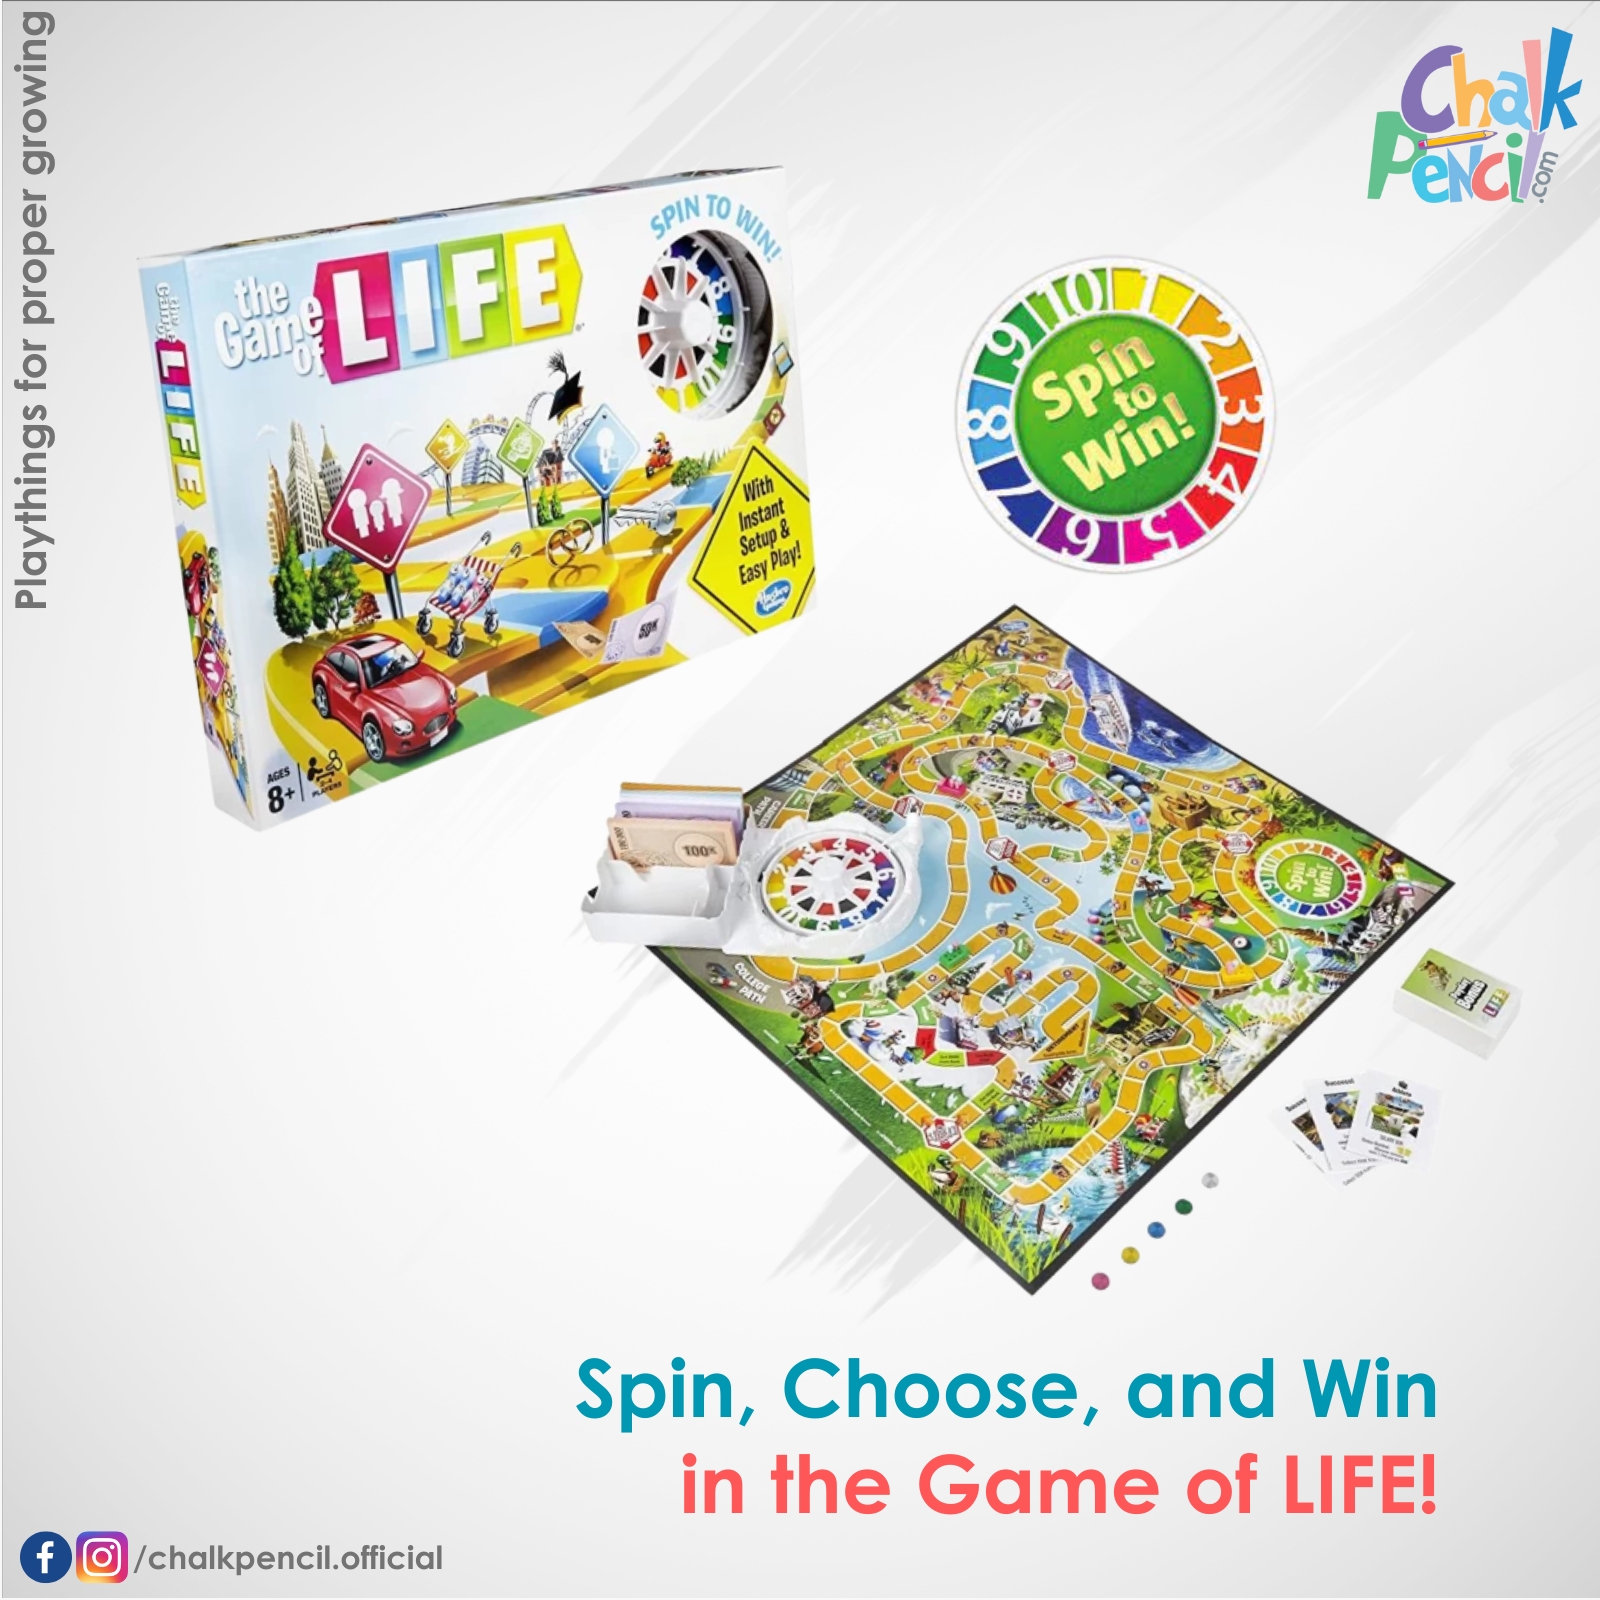 Web The Game of LIFE